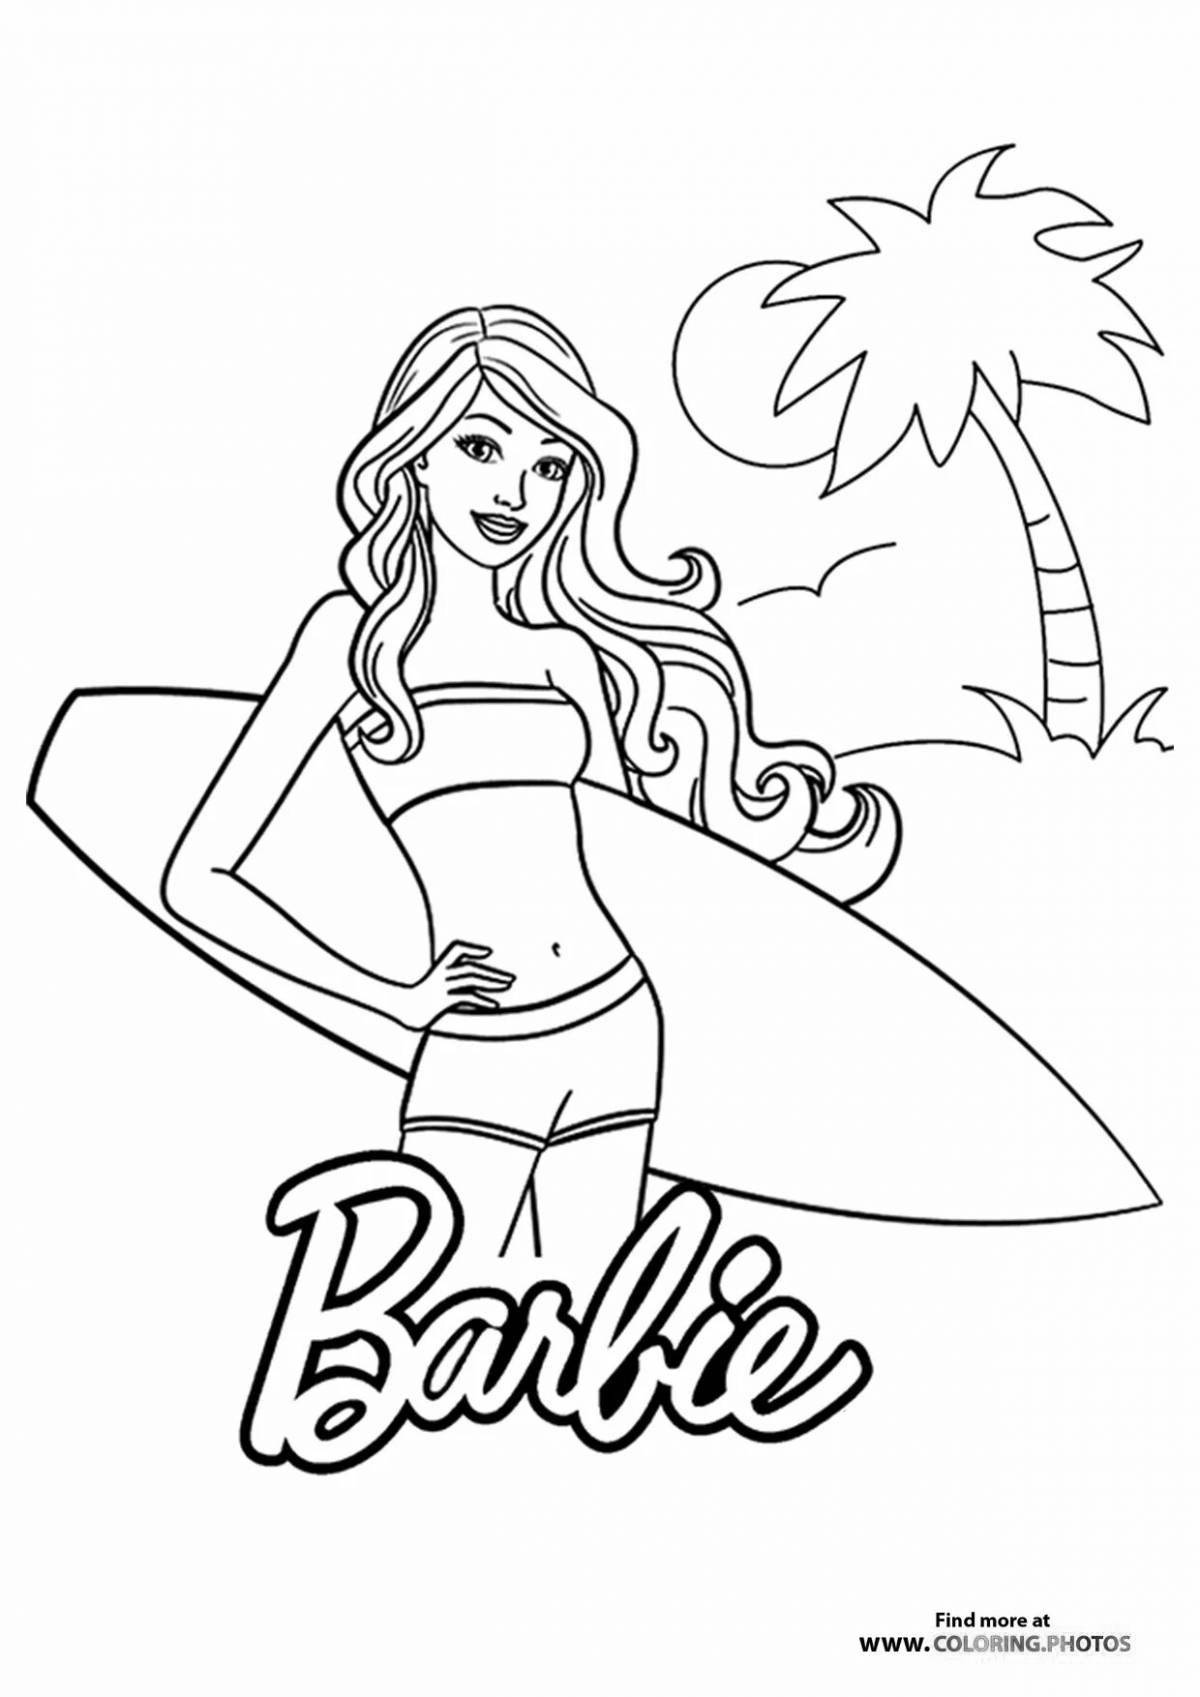 Sparkling coloring girl in a bathing suit